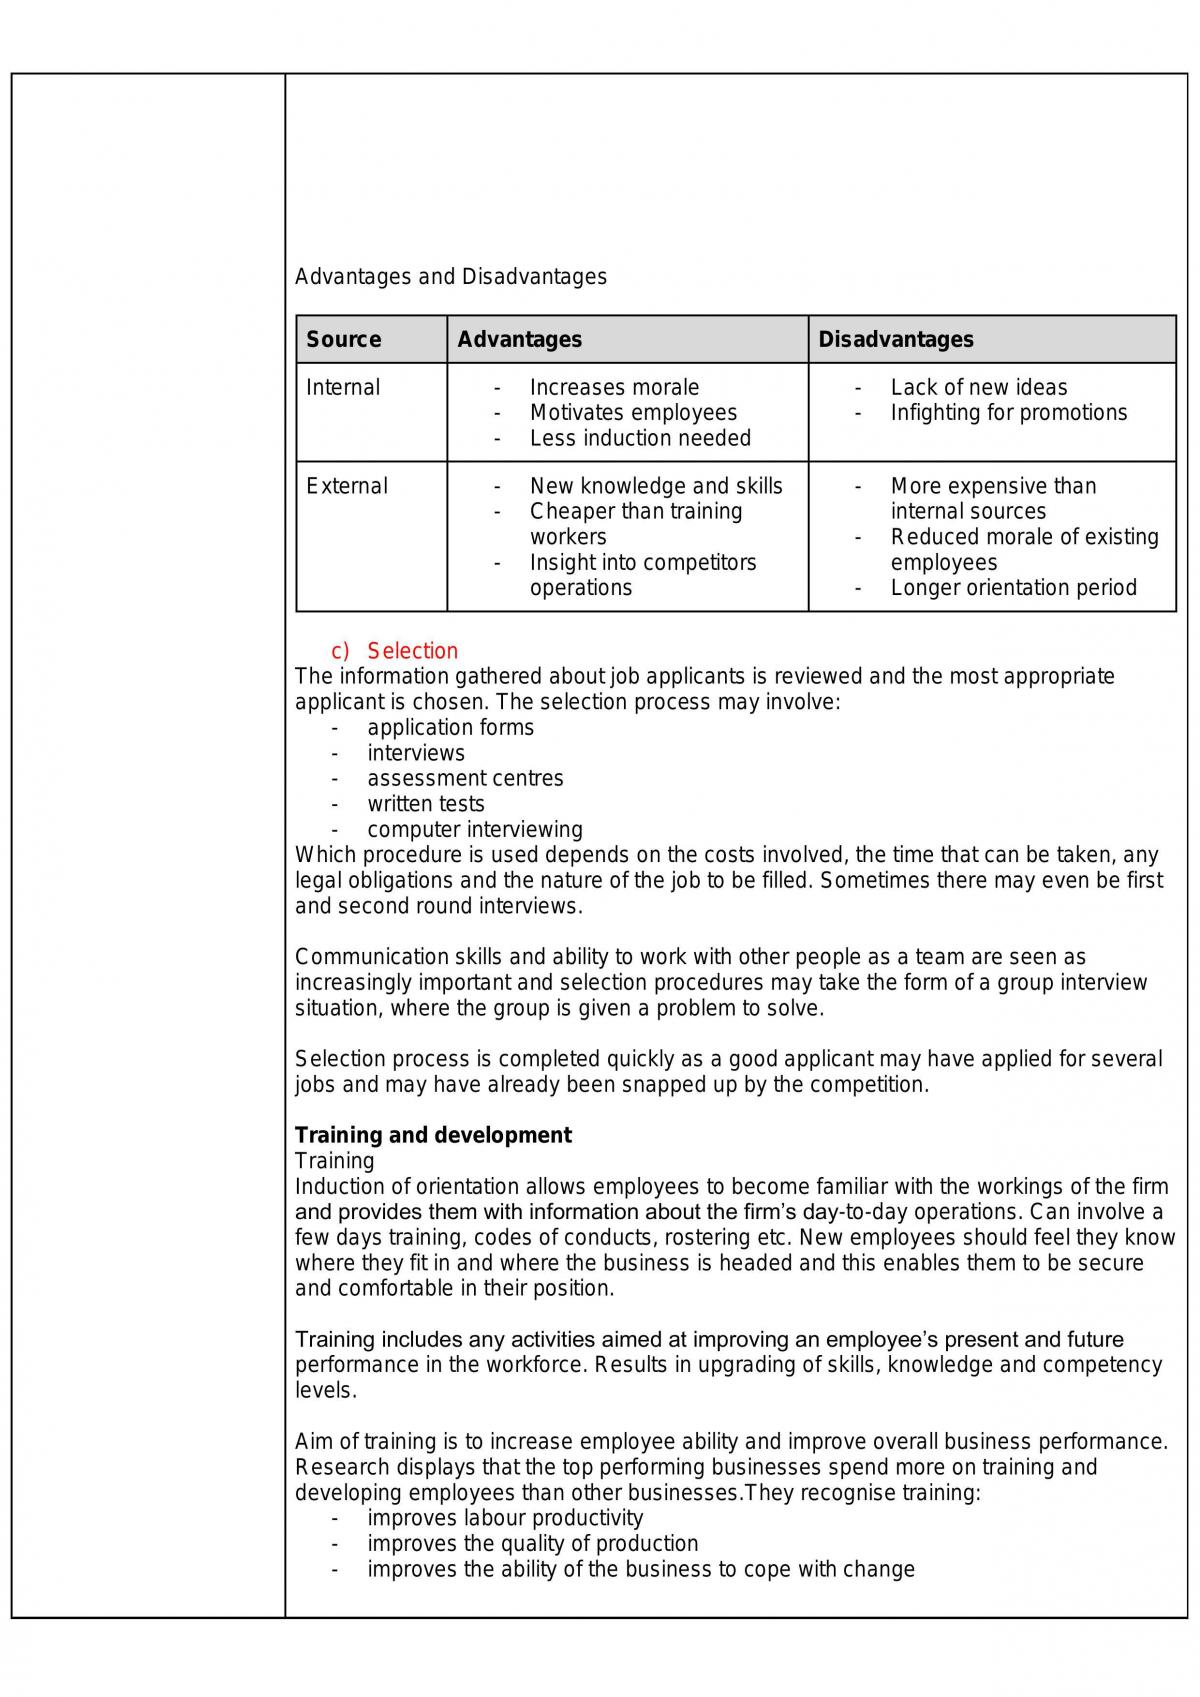 HSC Human Resources Notes - Page 16